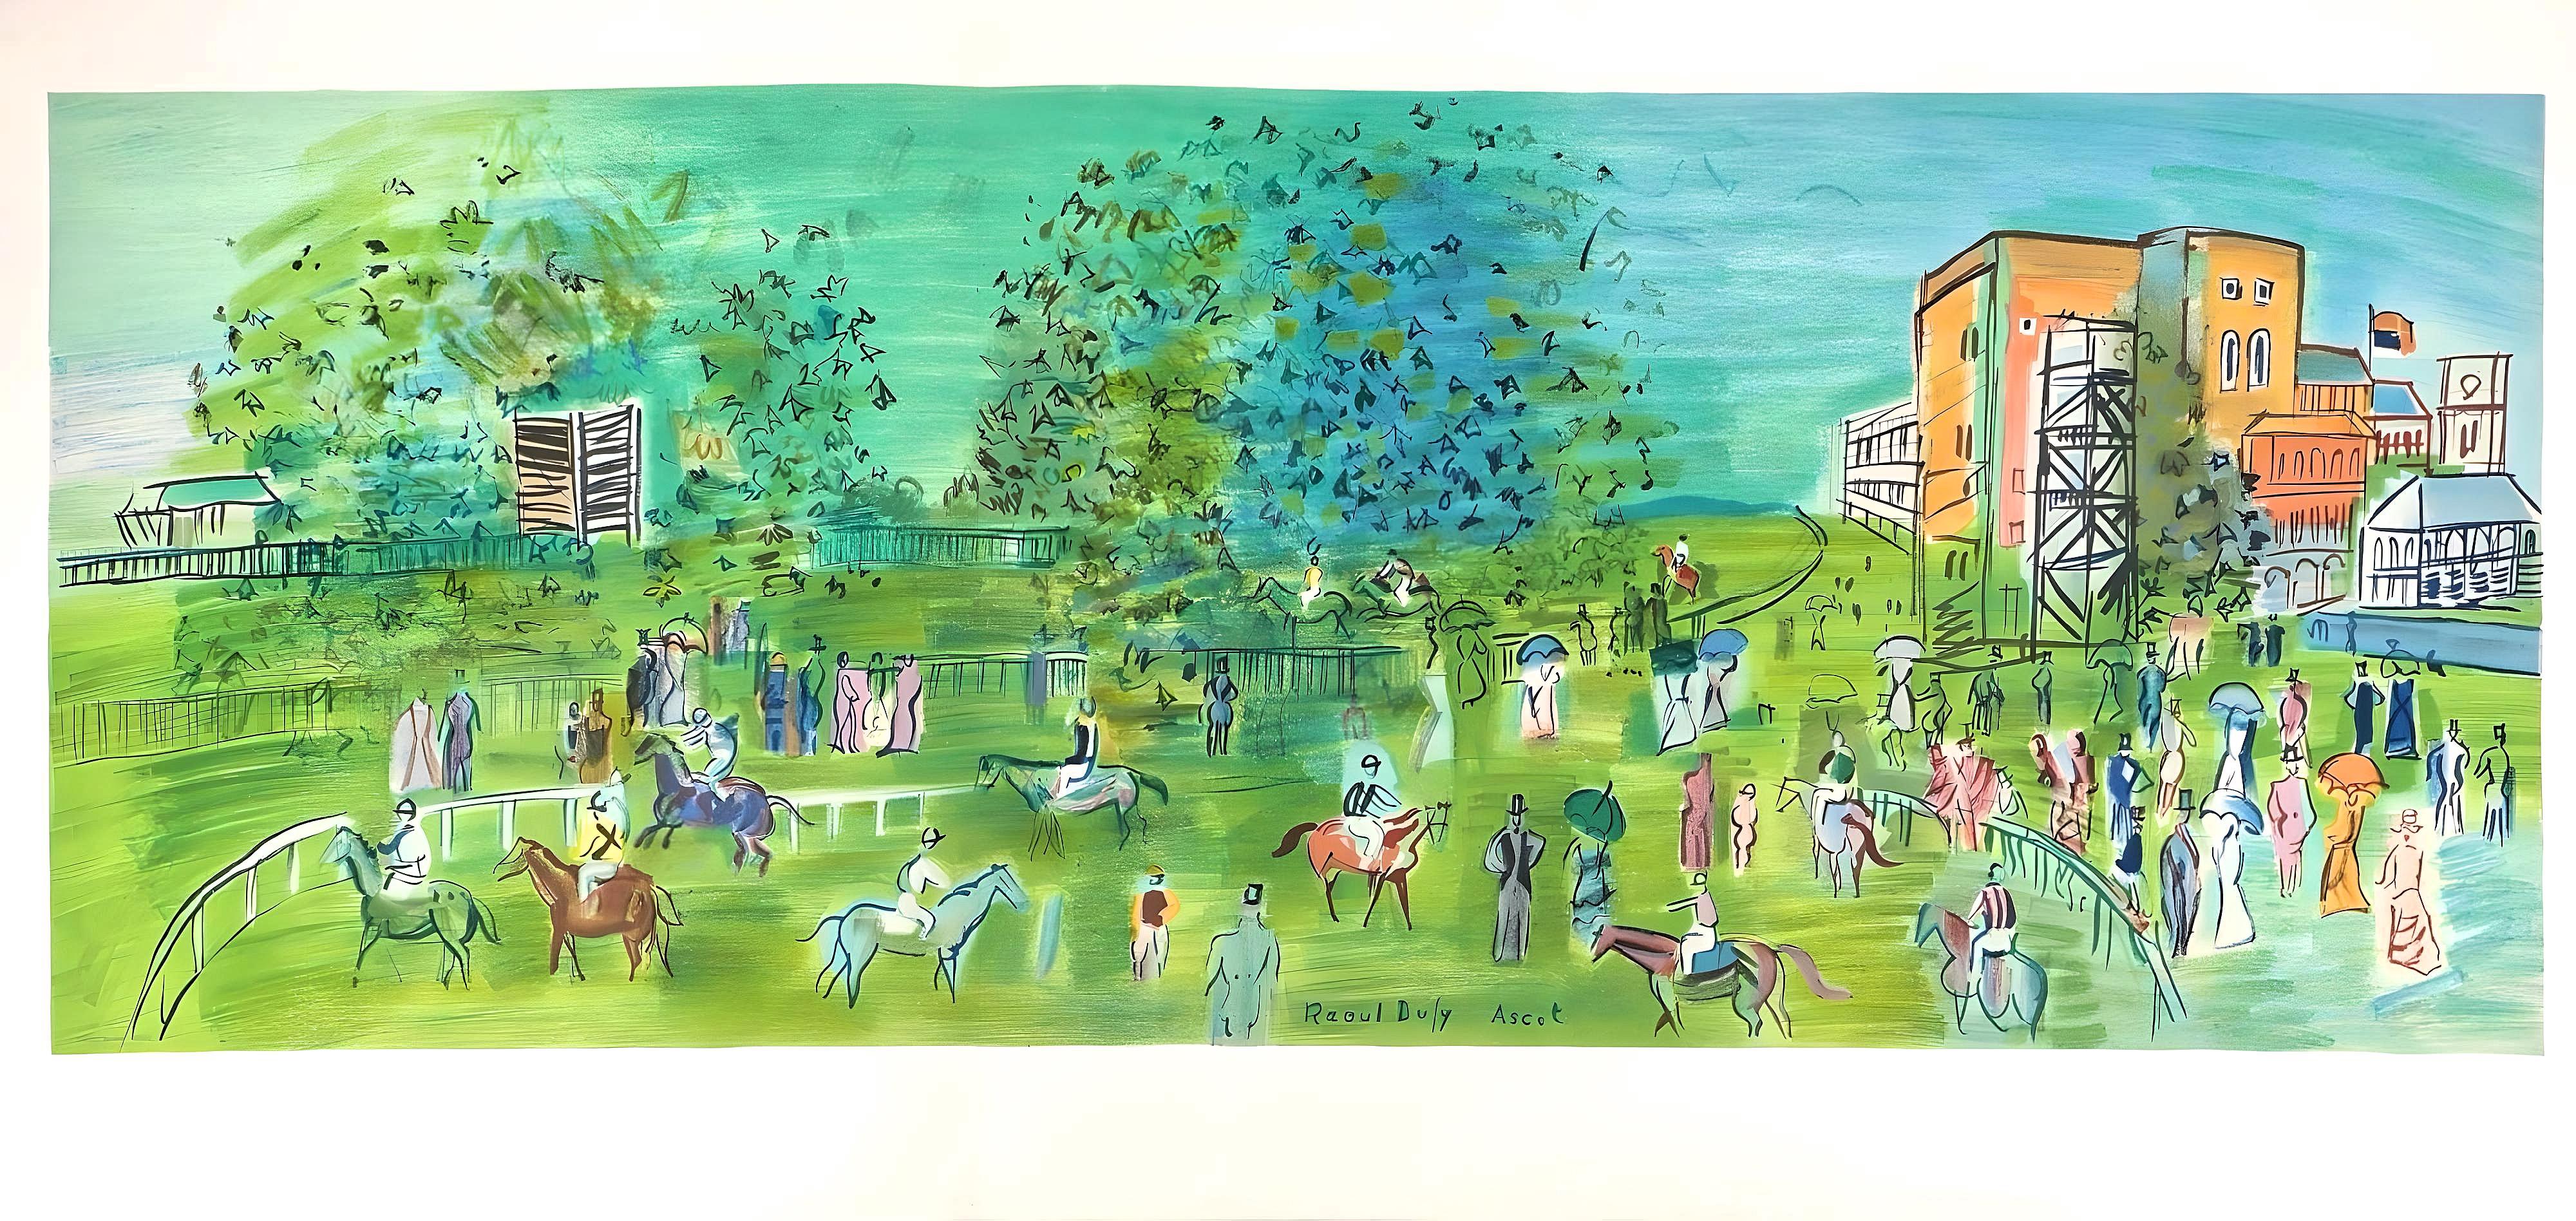 Dufy, Ascot, Raoul Dufy, Collection Pierre Lévy (after) For Sale 14